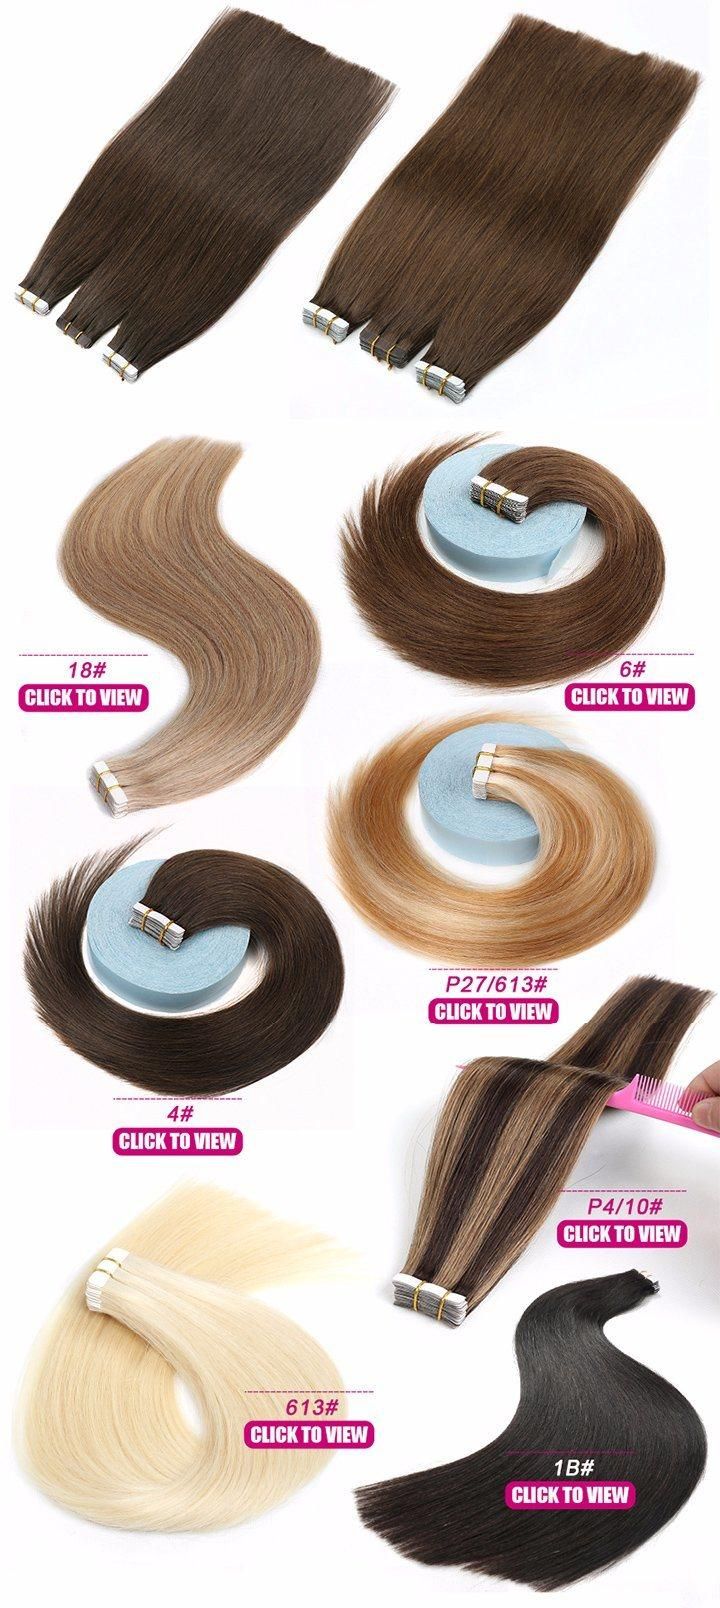 Peruvian Clip in Hair Extensions